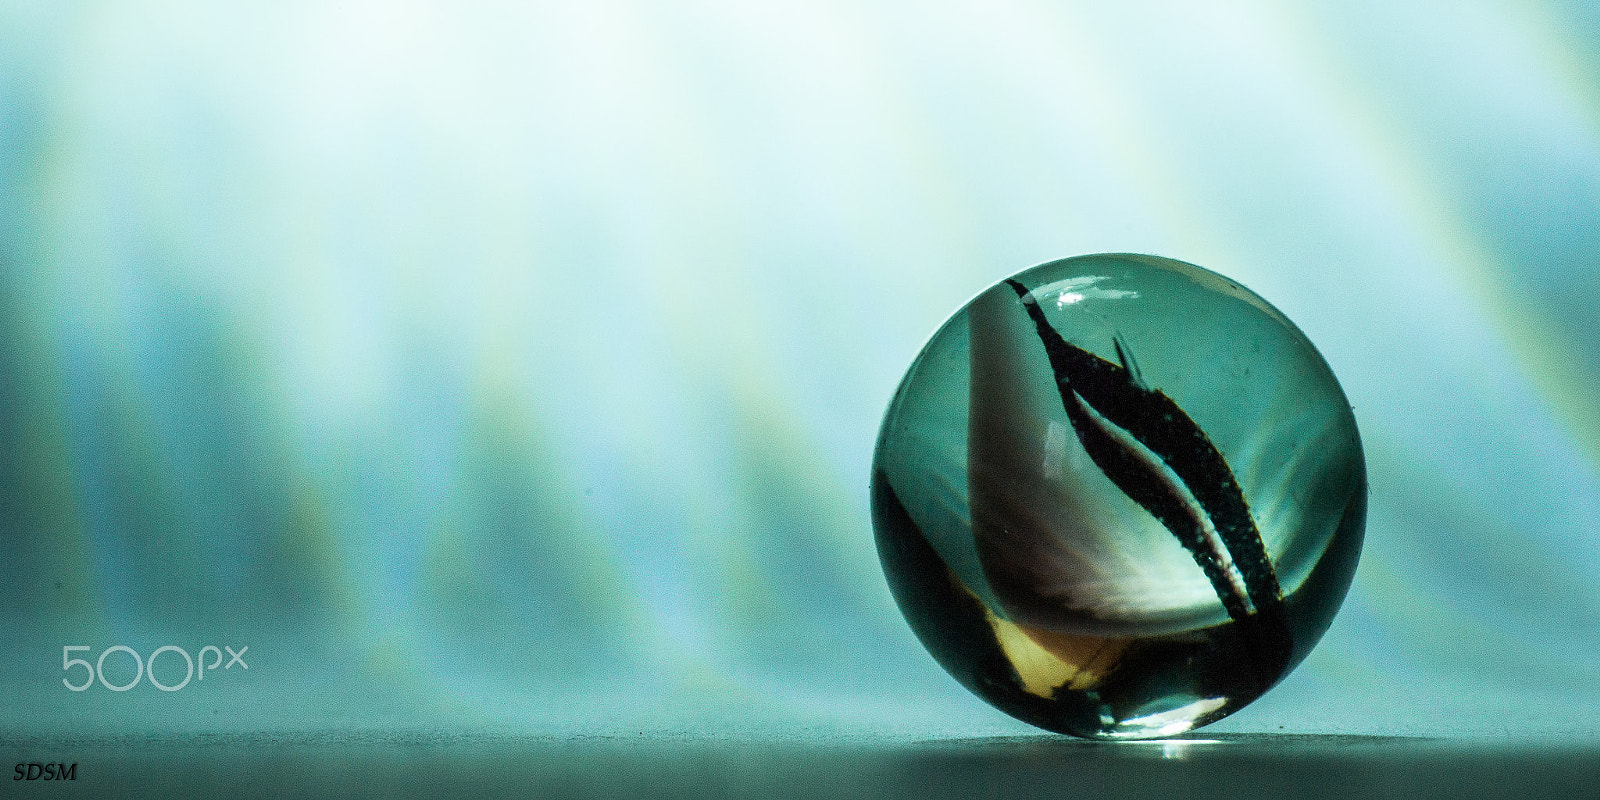 Pentax K-7 sample photo. Abstract landscape with a marble photography